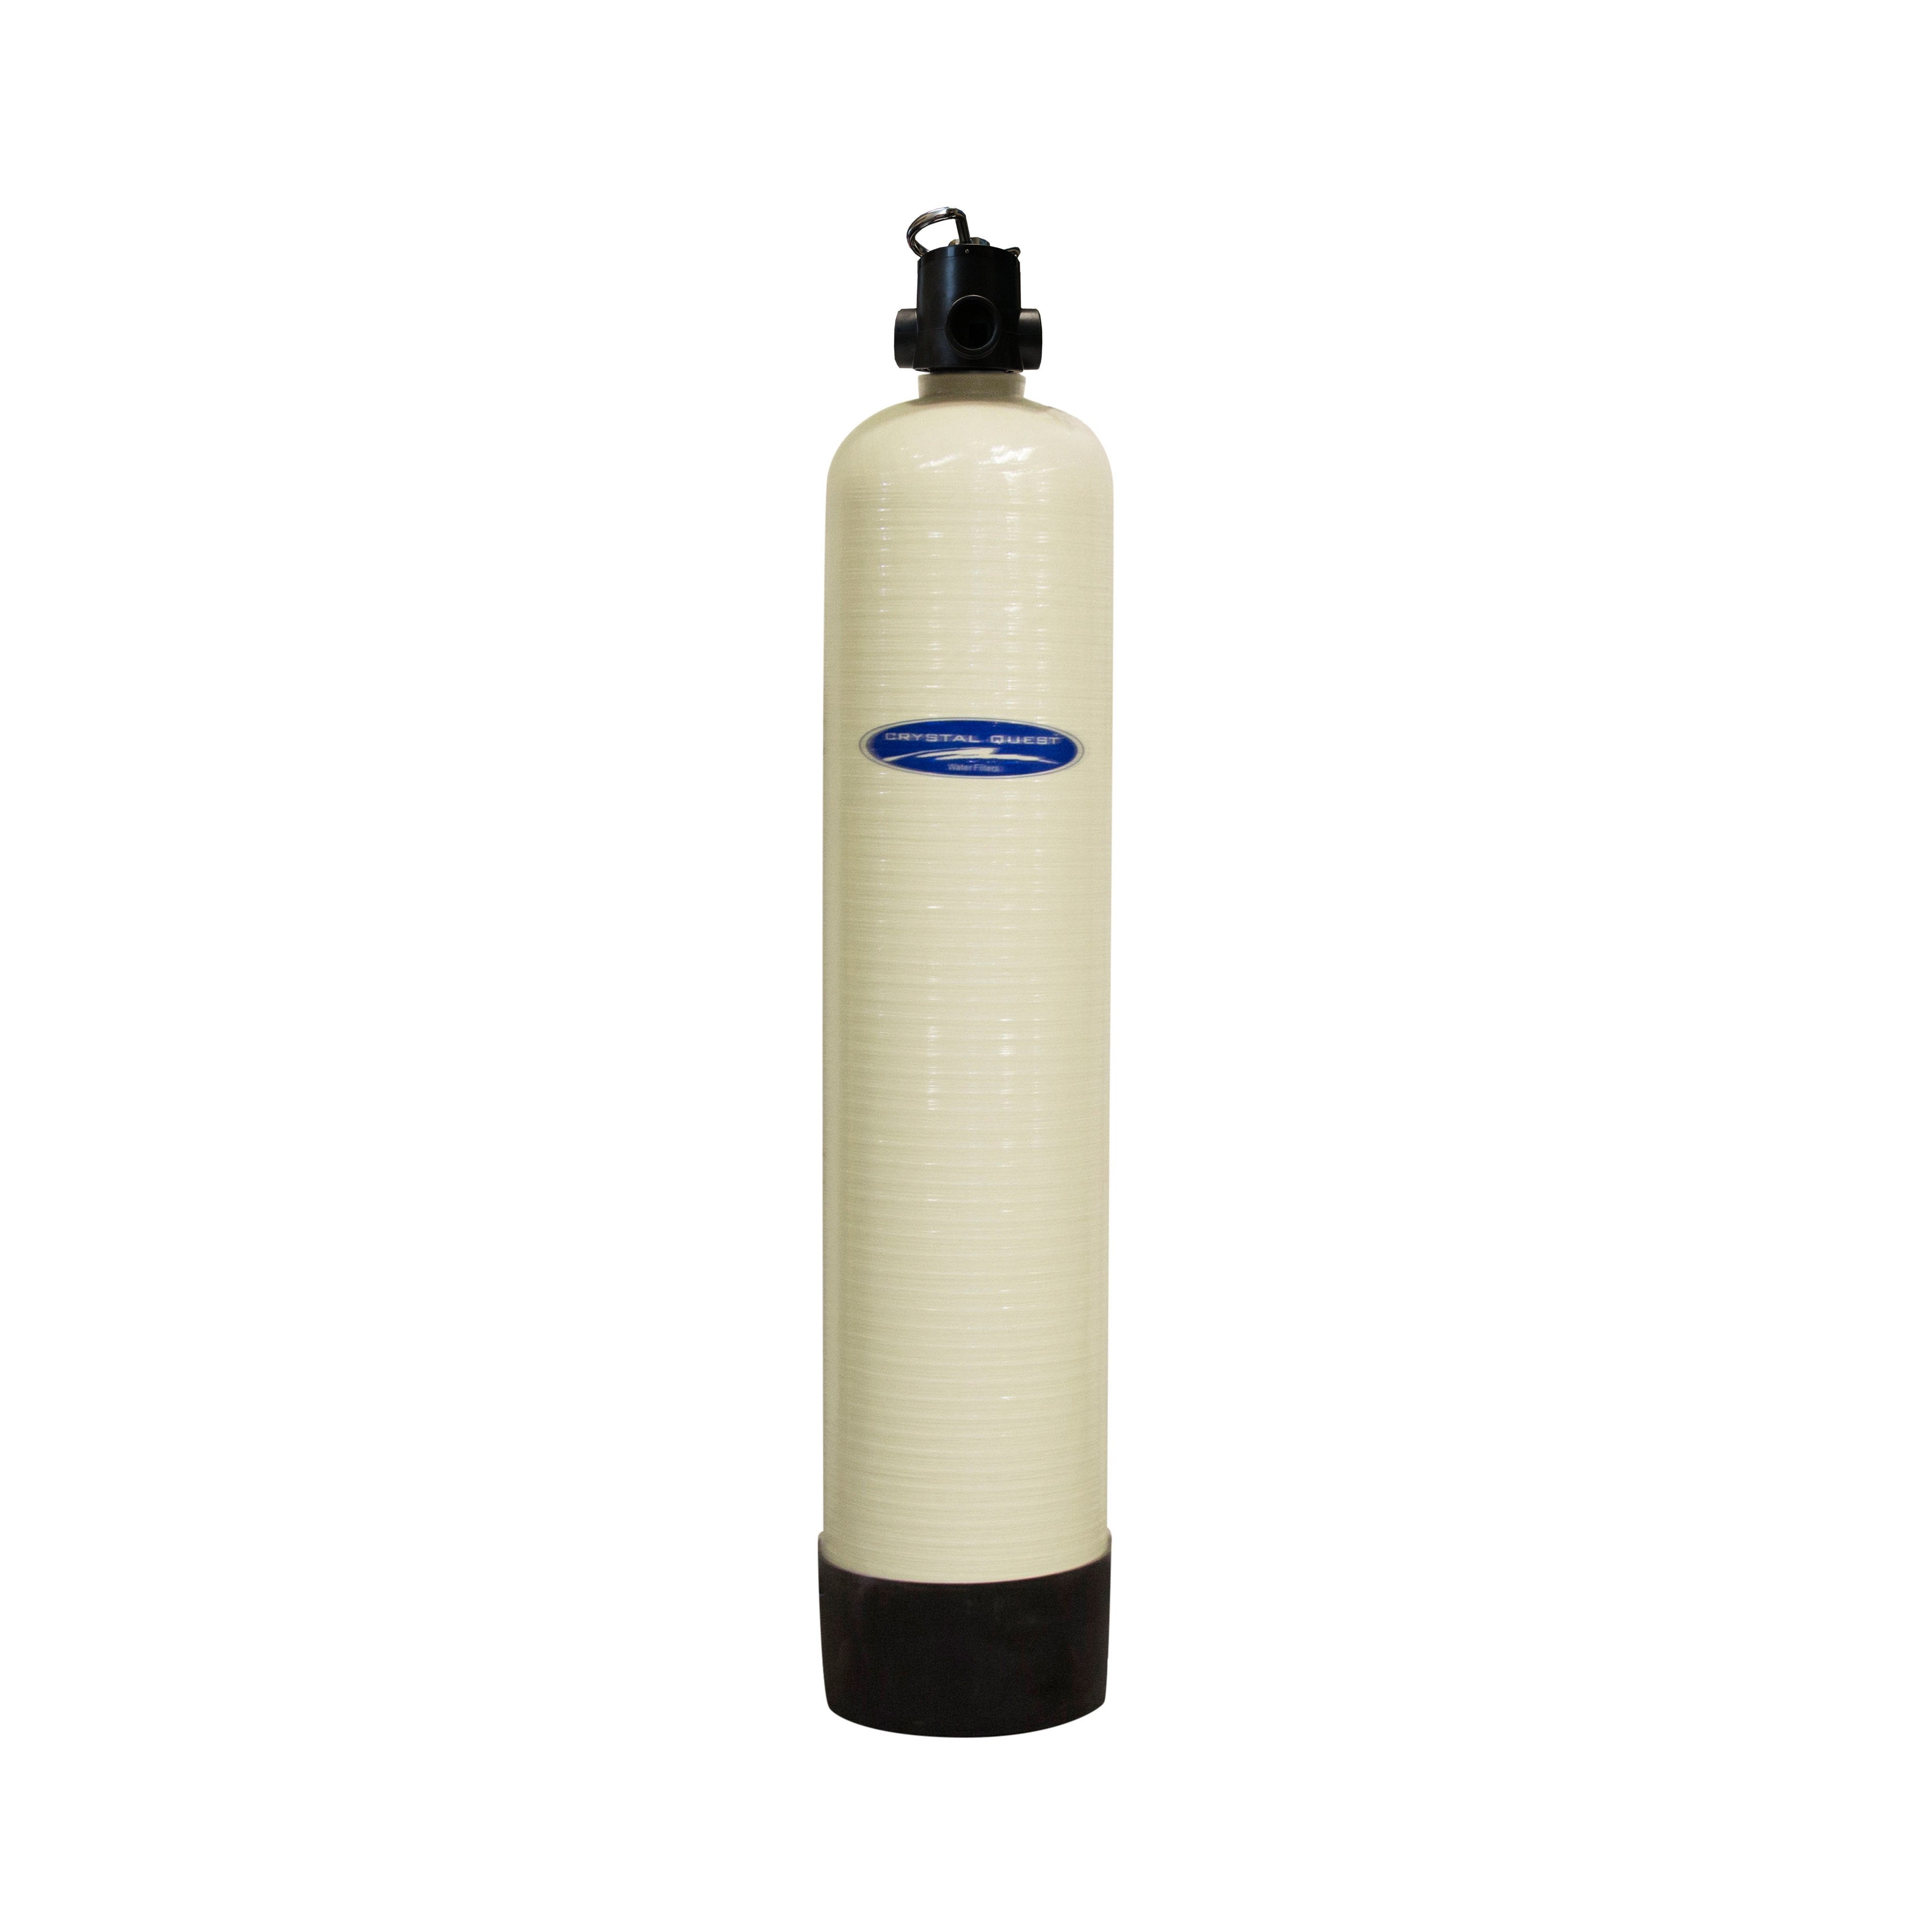 Demineralizing (DI) Water Filtration System